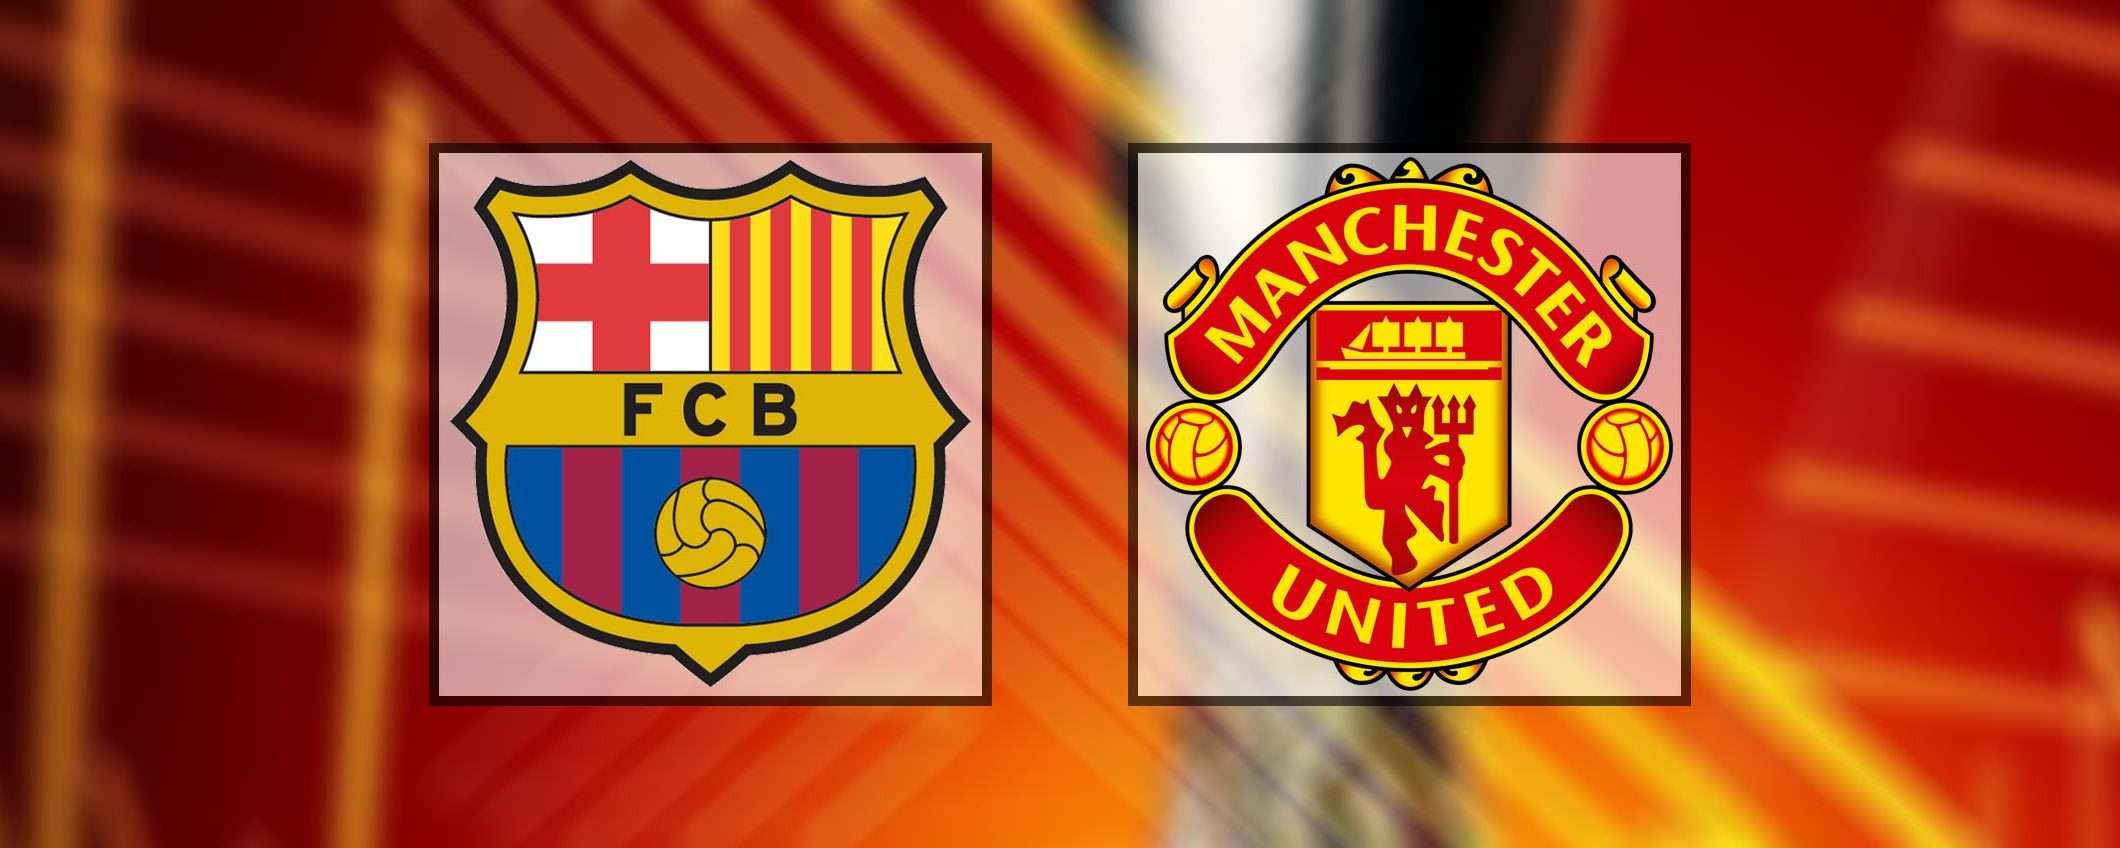 Come vedere Barcellona-Manchester United in streaming